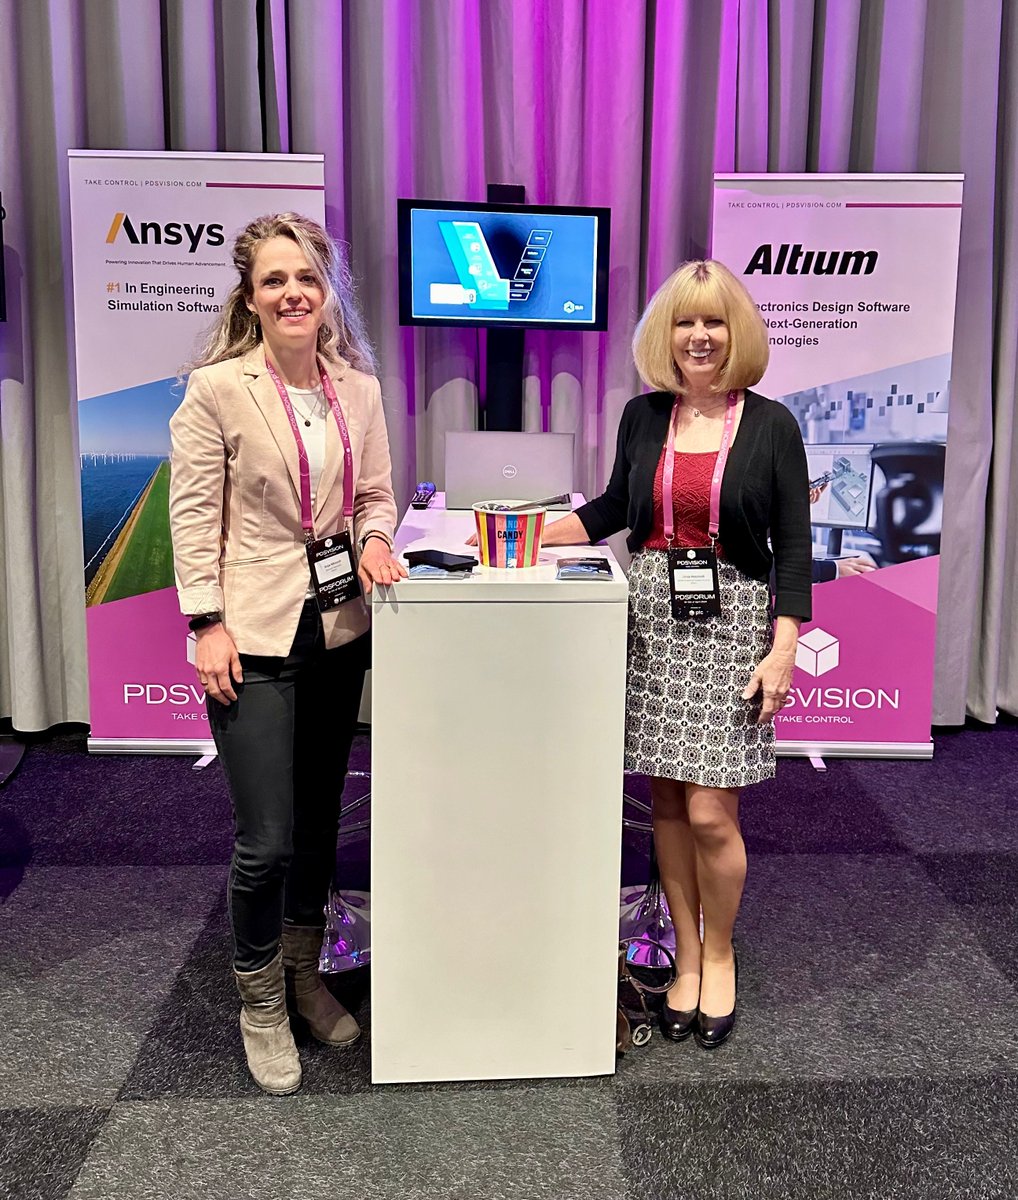 We had a great time at PDS Forum 2024 this week in the Exhibition Room alongside @PTC, @ANSYS, and @PDSVISION learning about the latest in digital transformation. Thanks to everyone who stopped by our table! Learn more about our digital connections: bit.ly/3PZ7brY